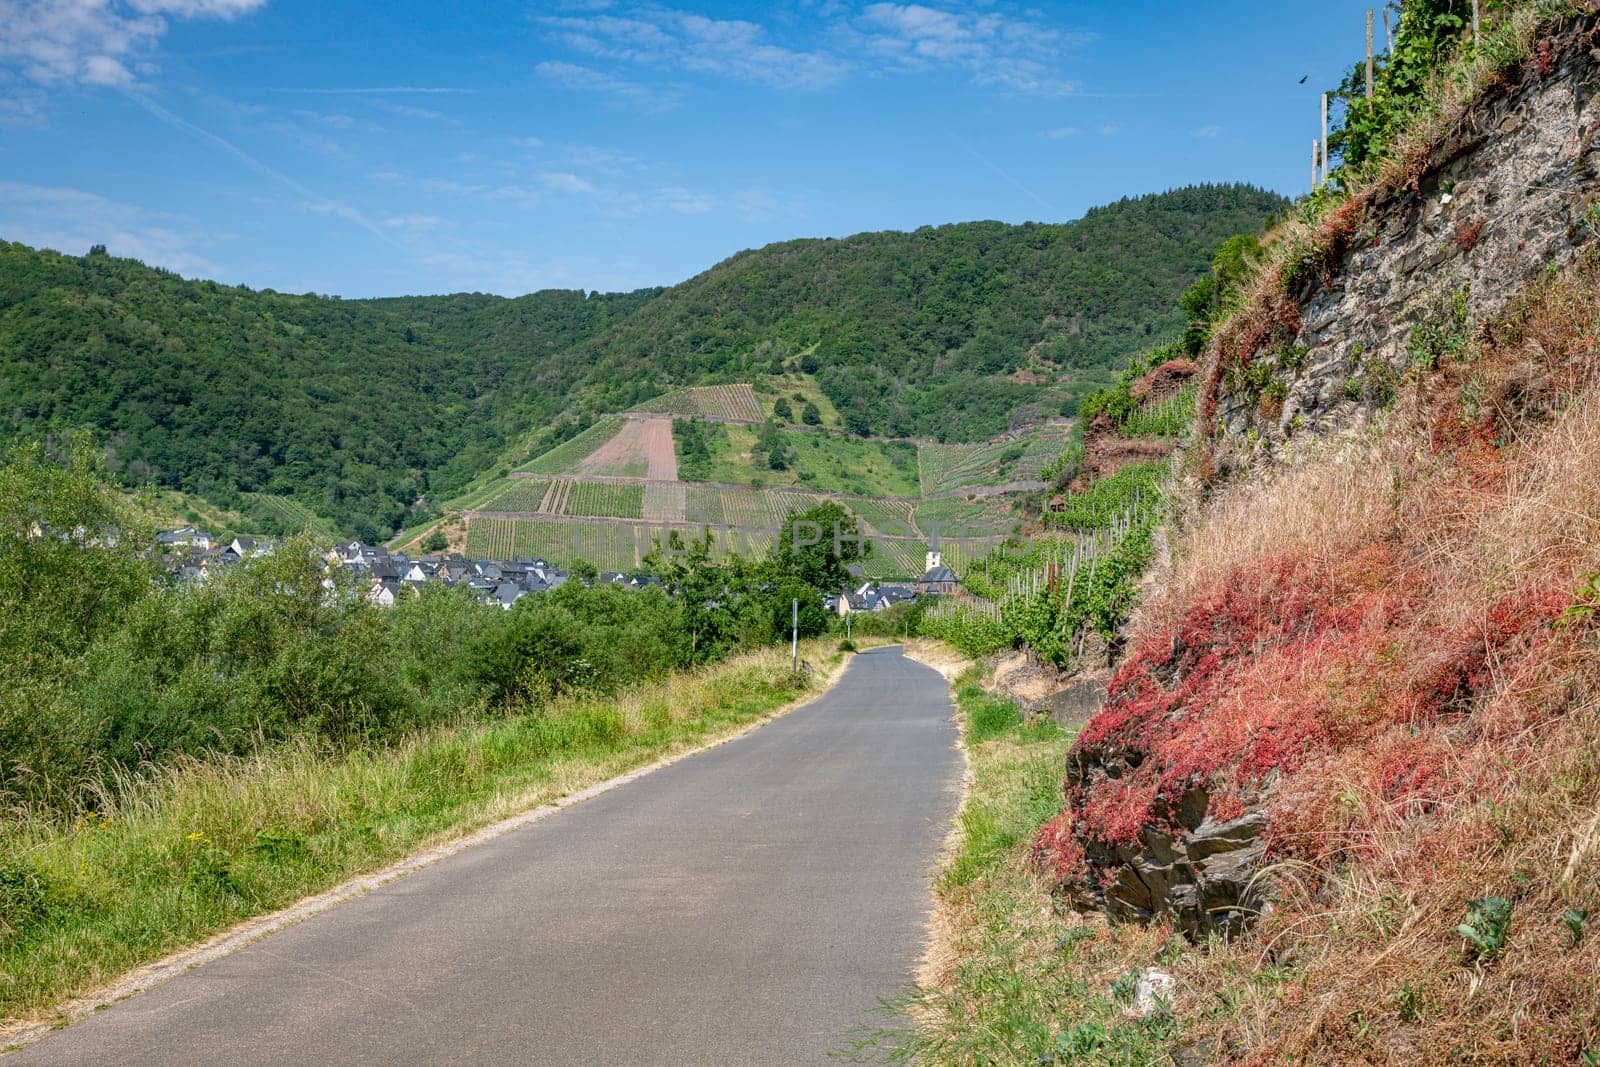 the cycle path along the Moselle in Germany near the town of Bremm with the rocks on the right with the wine grapes and other vegetation